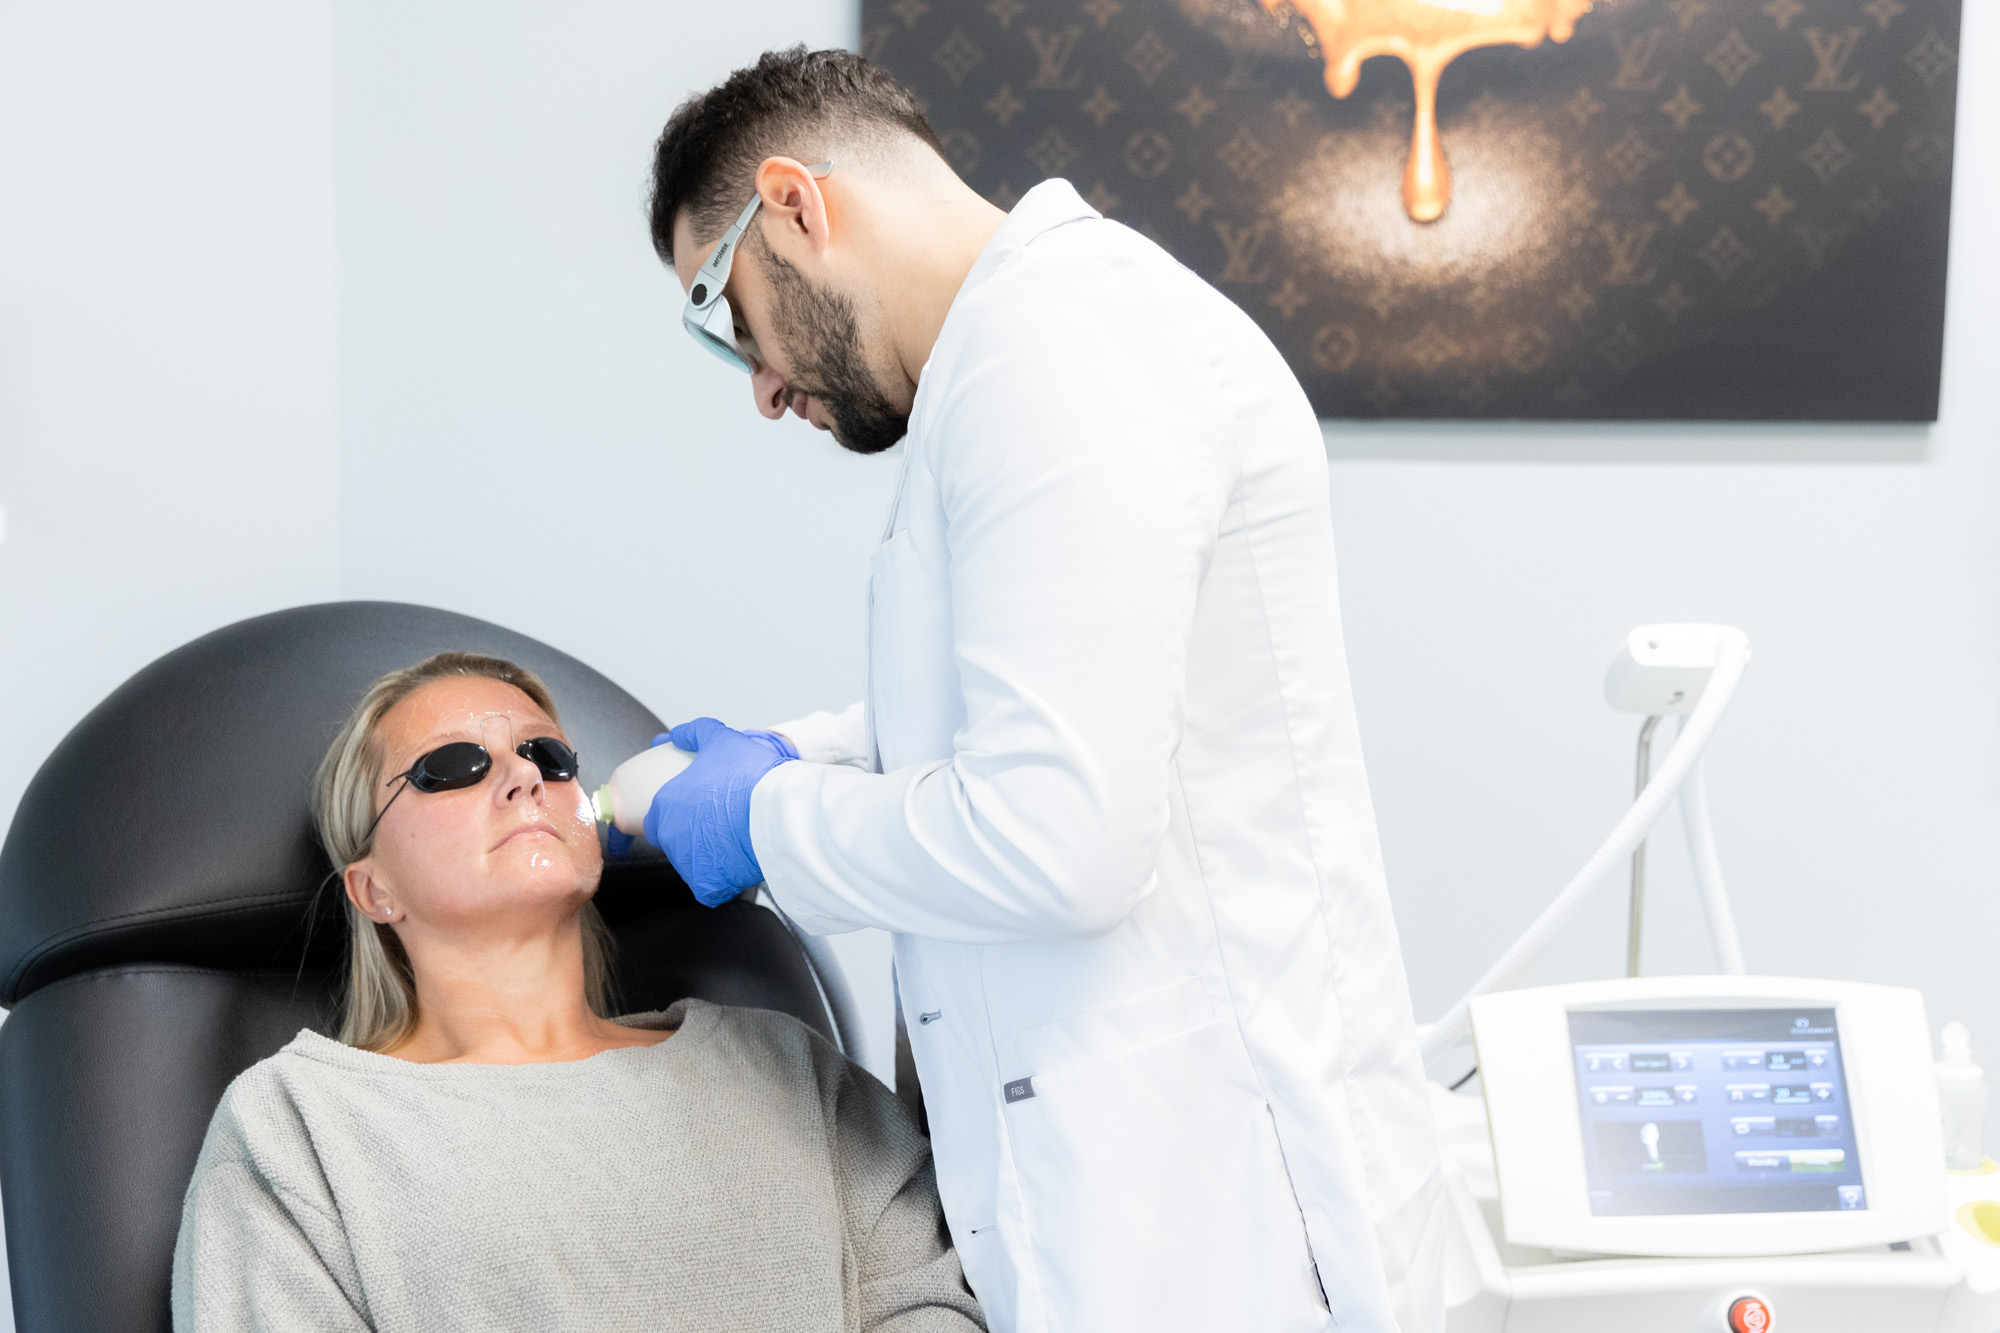 A Radiant Divine provider treats a woman using an IPL laser in Cleveland